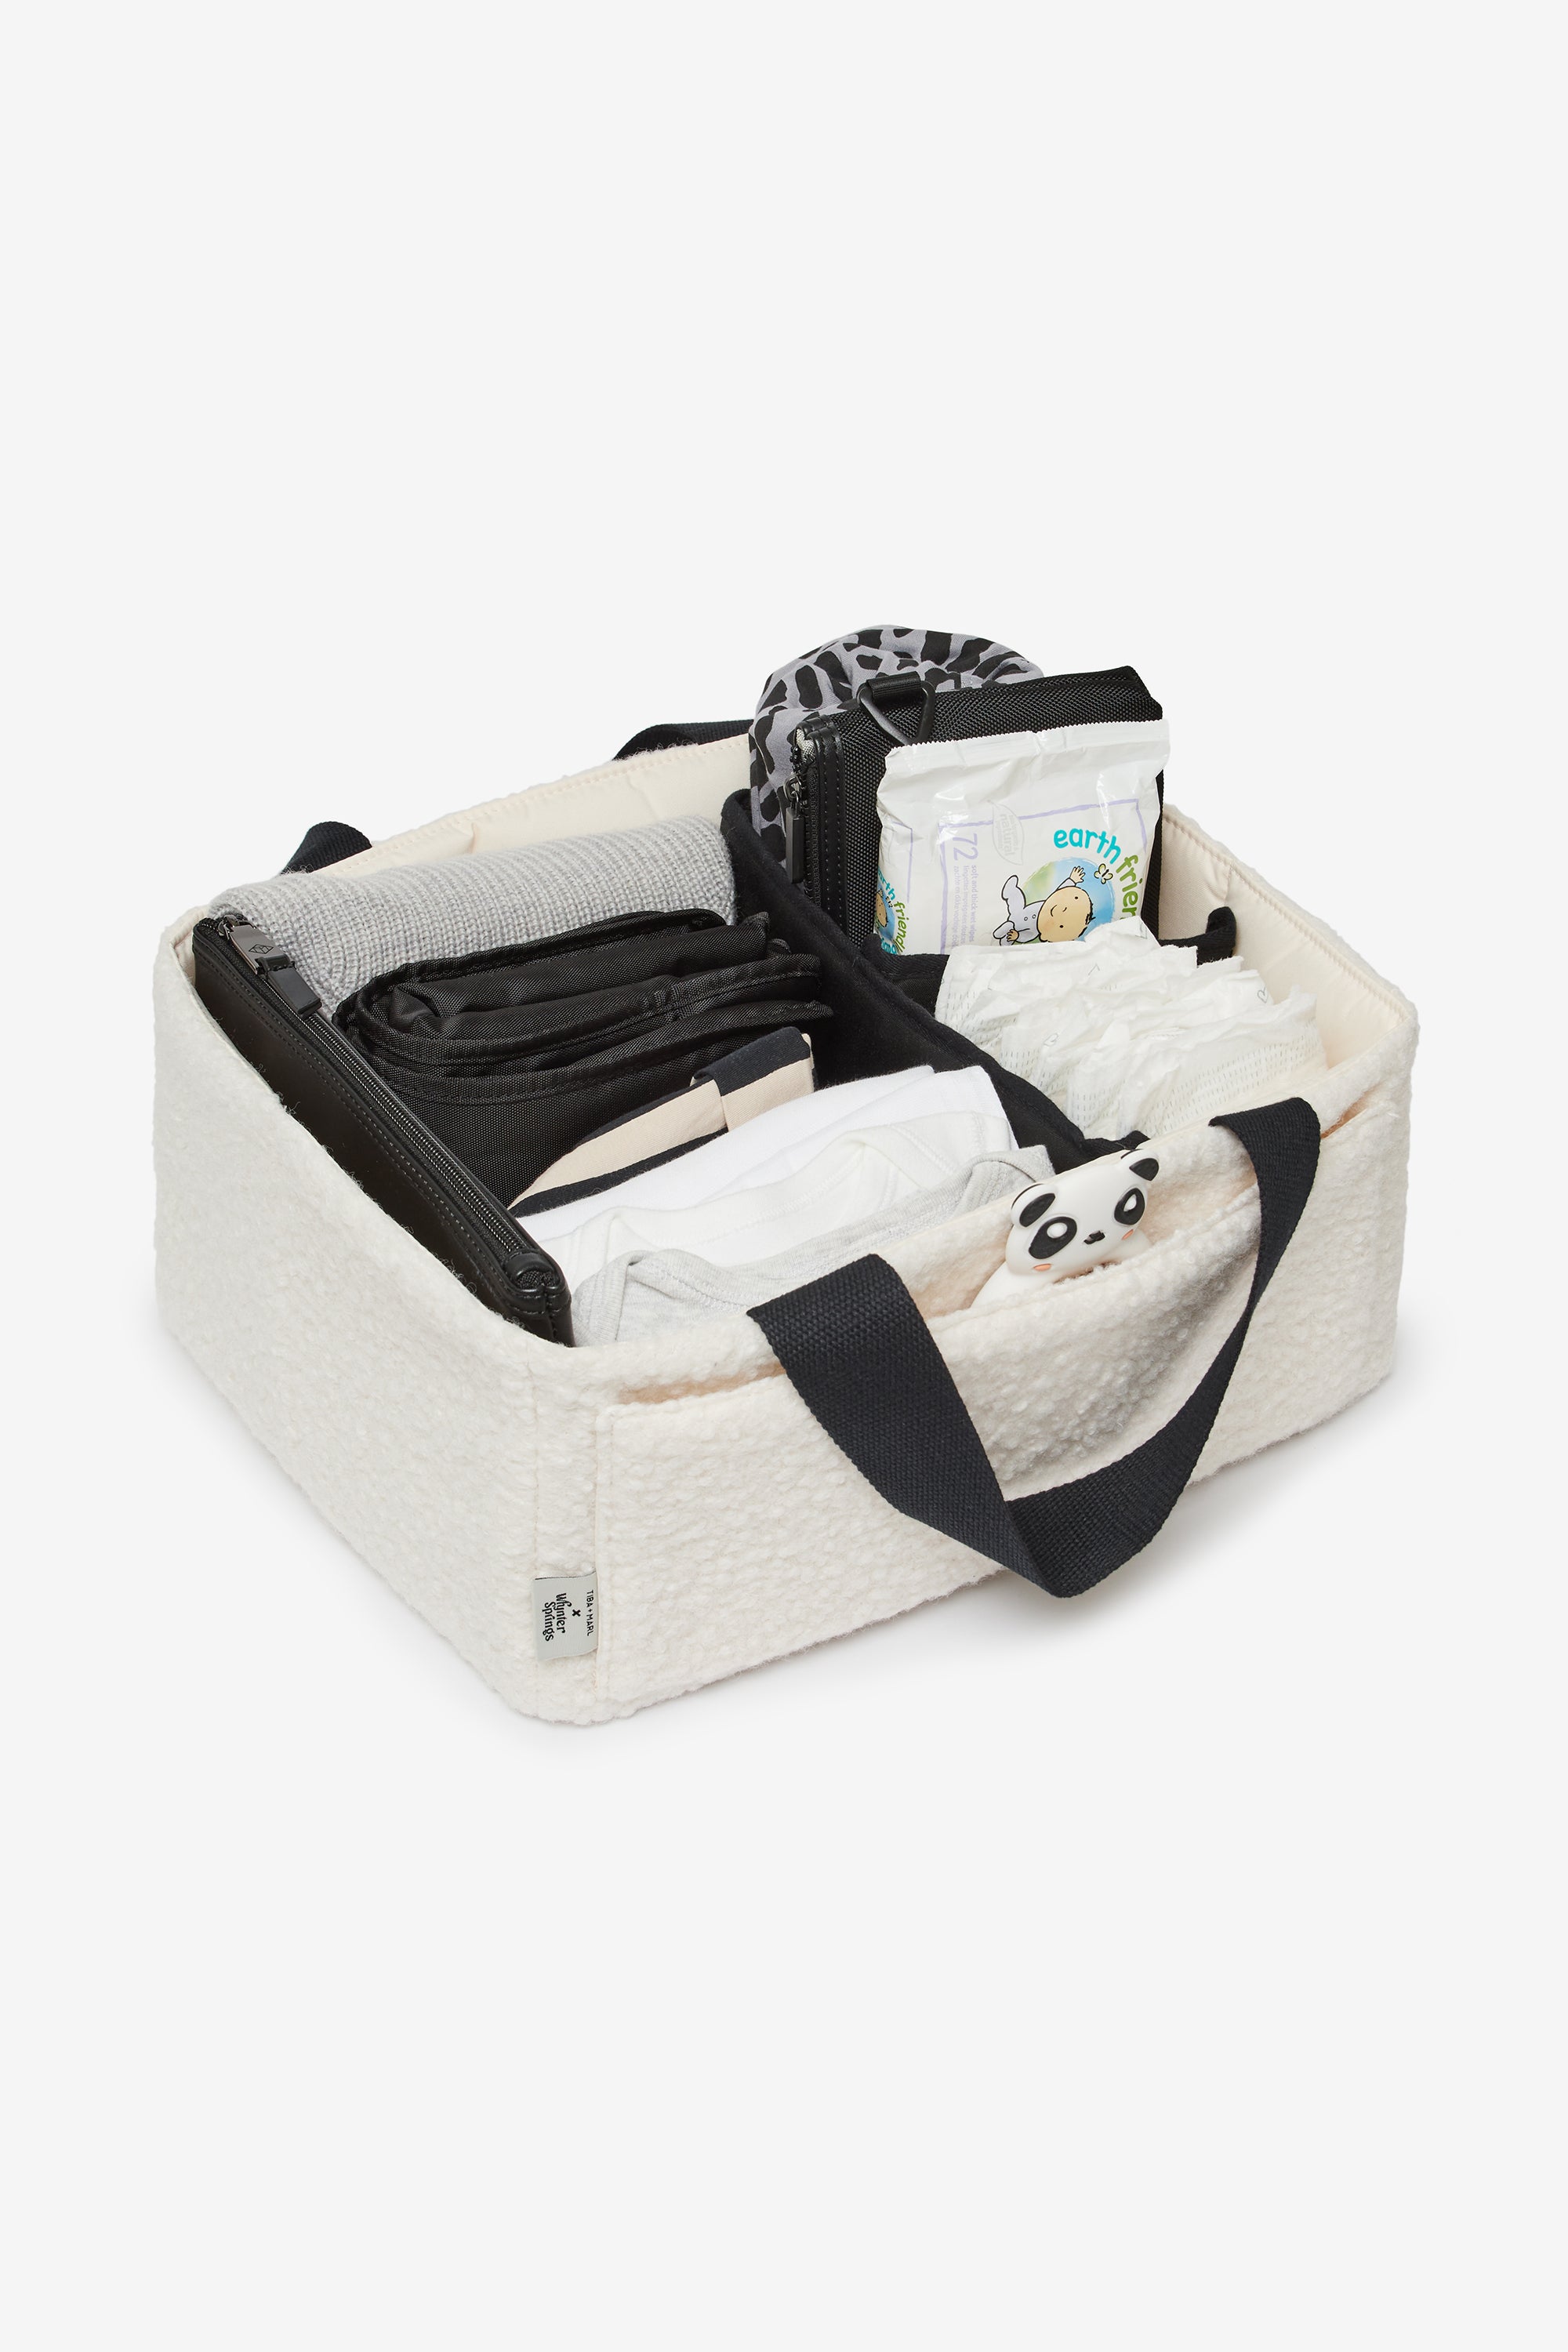 T+M x Whynter Springs Nappy Caddy Organiser Cream Boucle